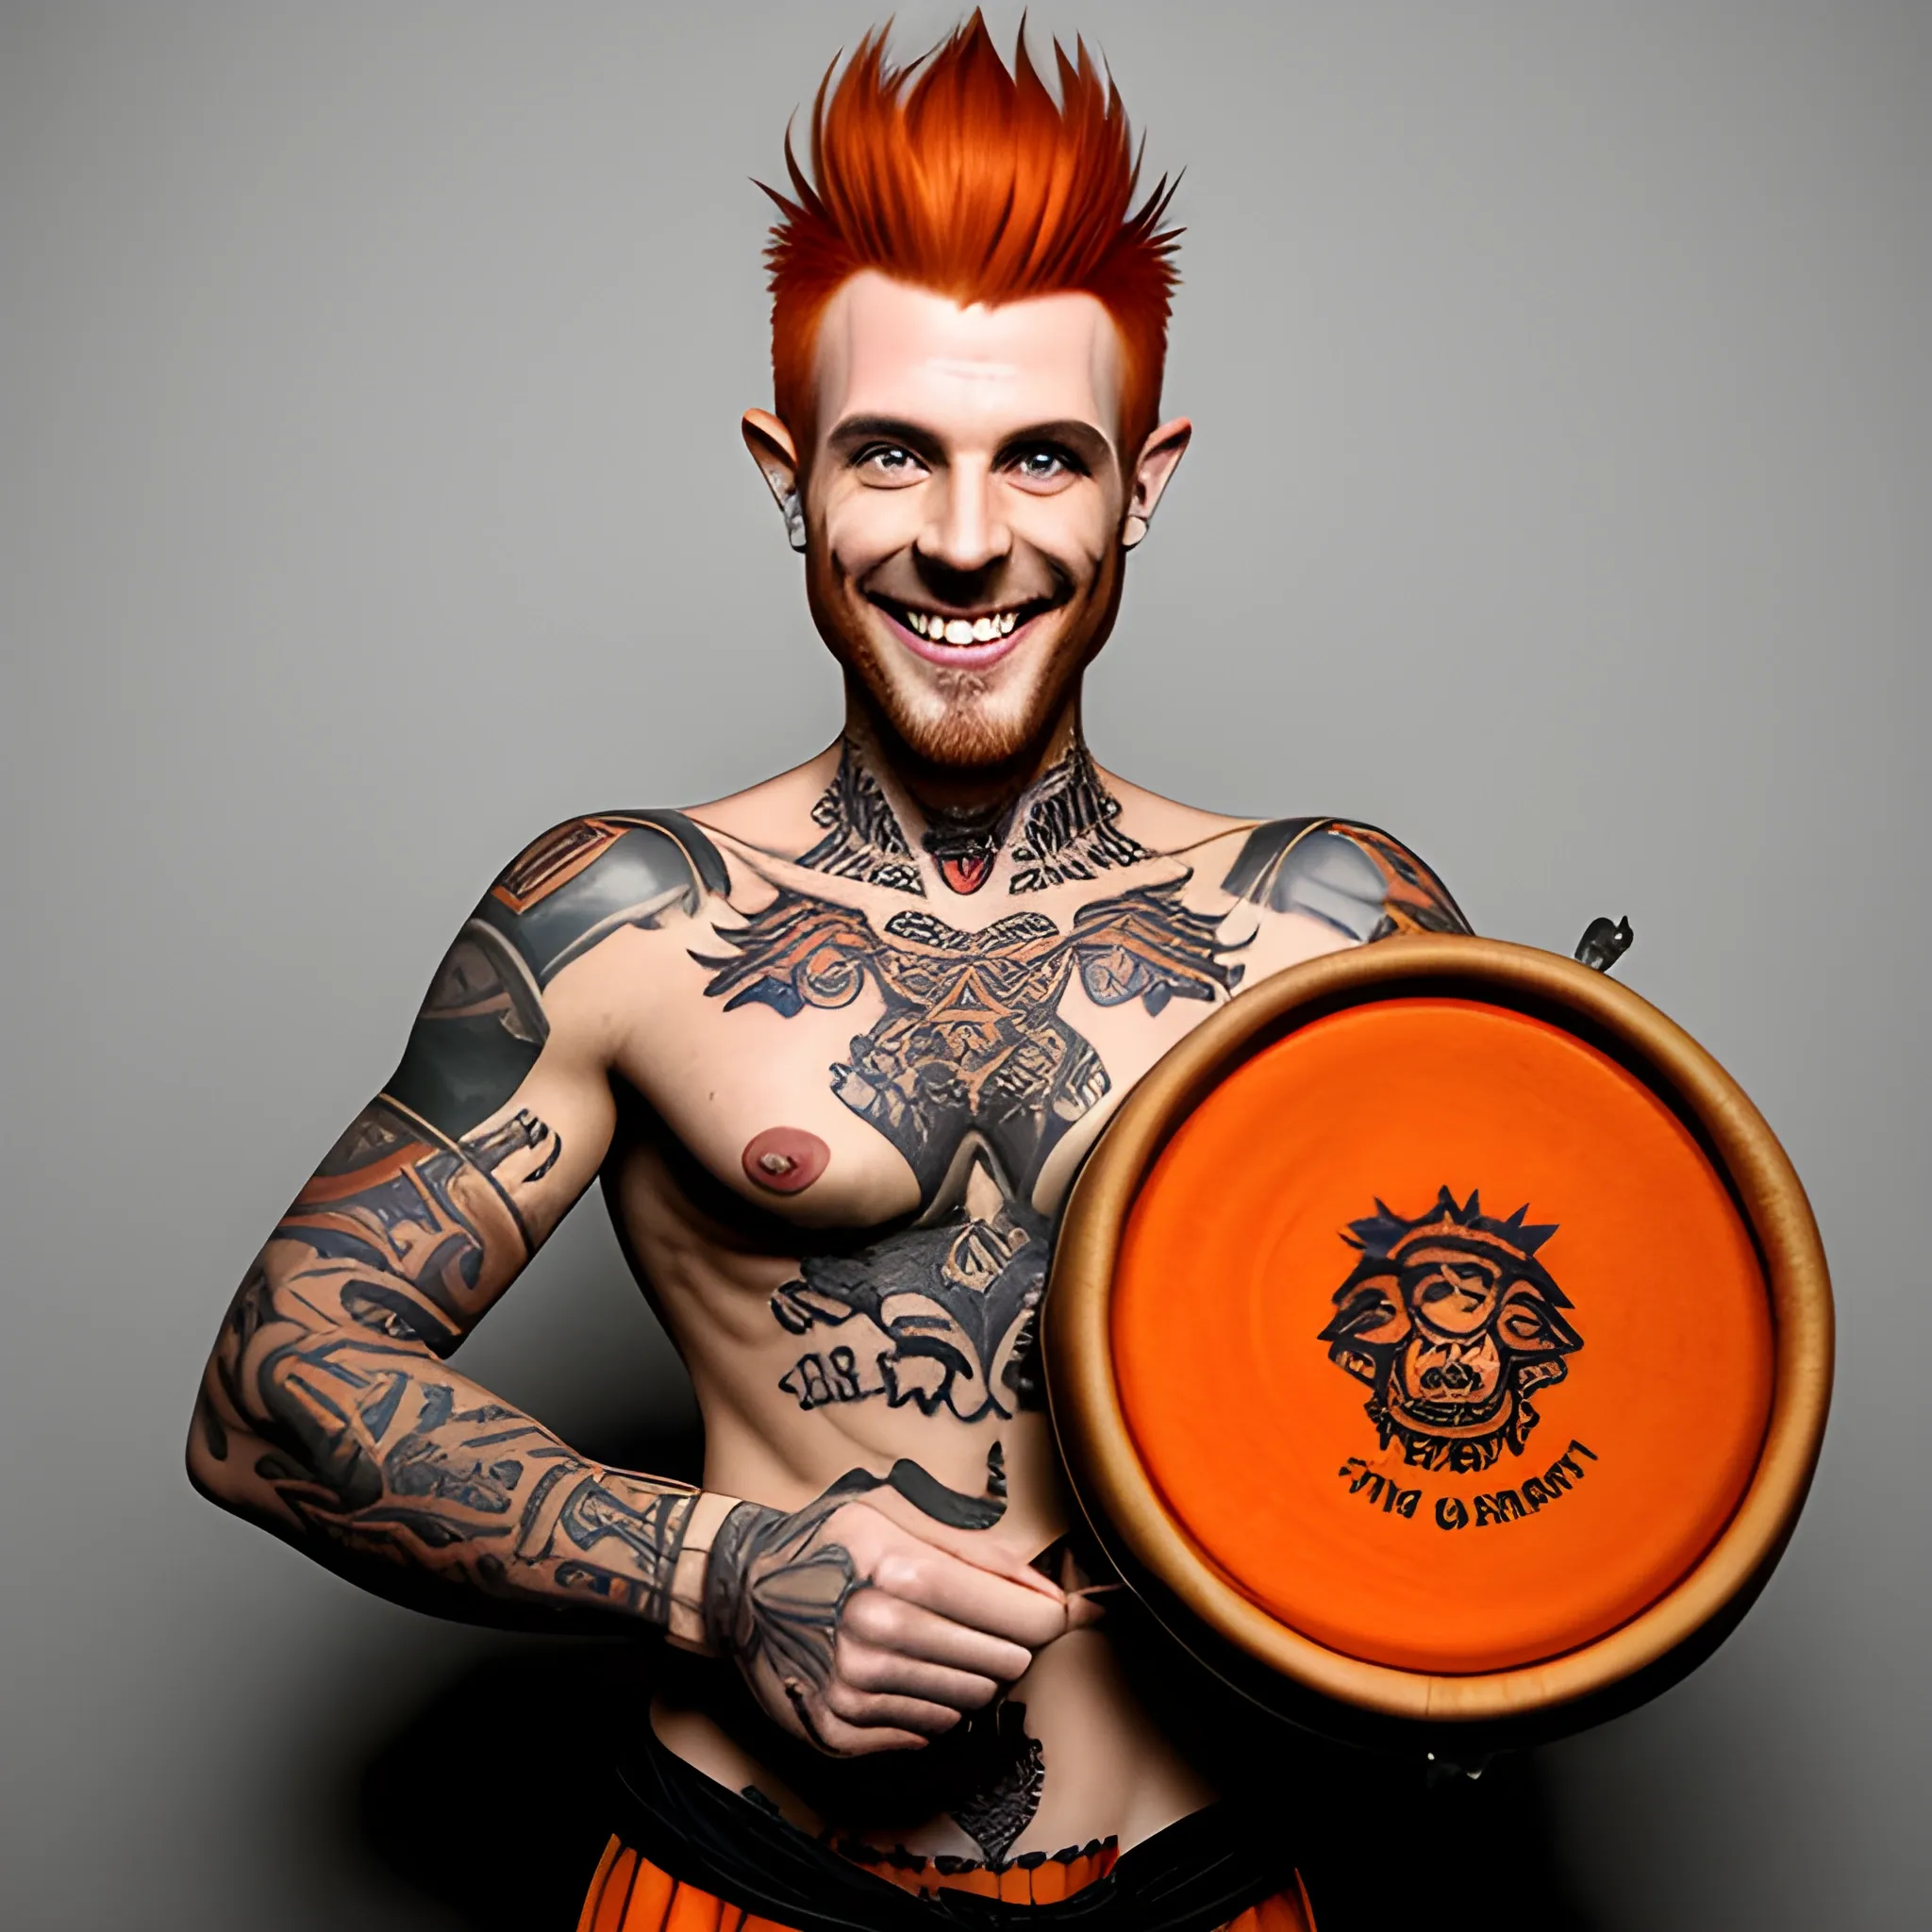 DnD  thin skinny non muscular baby face young halfling male short haired dark orange ginger with a neck tattoo smiling with a mugshot expression and playing a drum